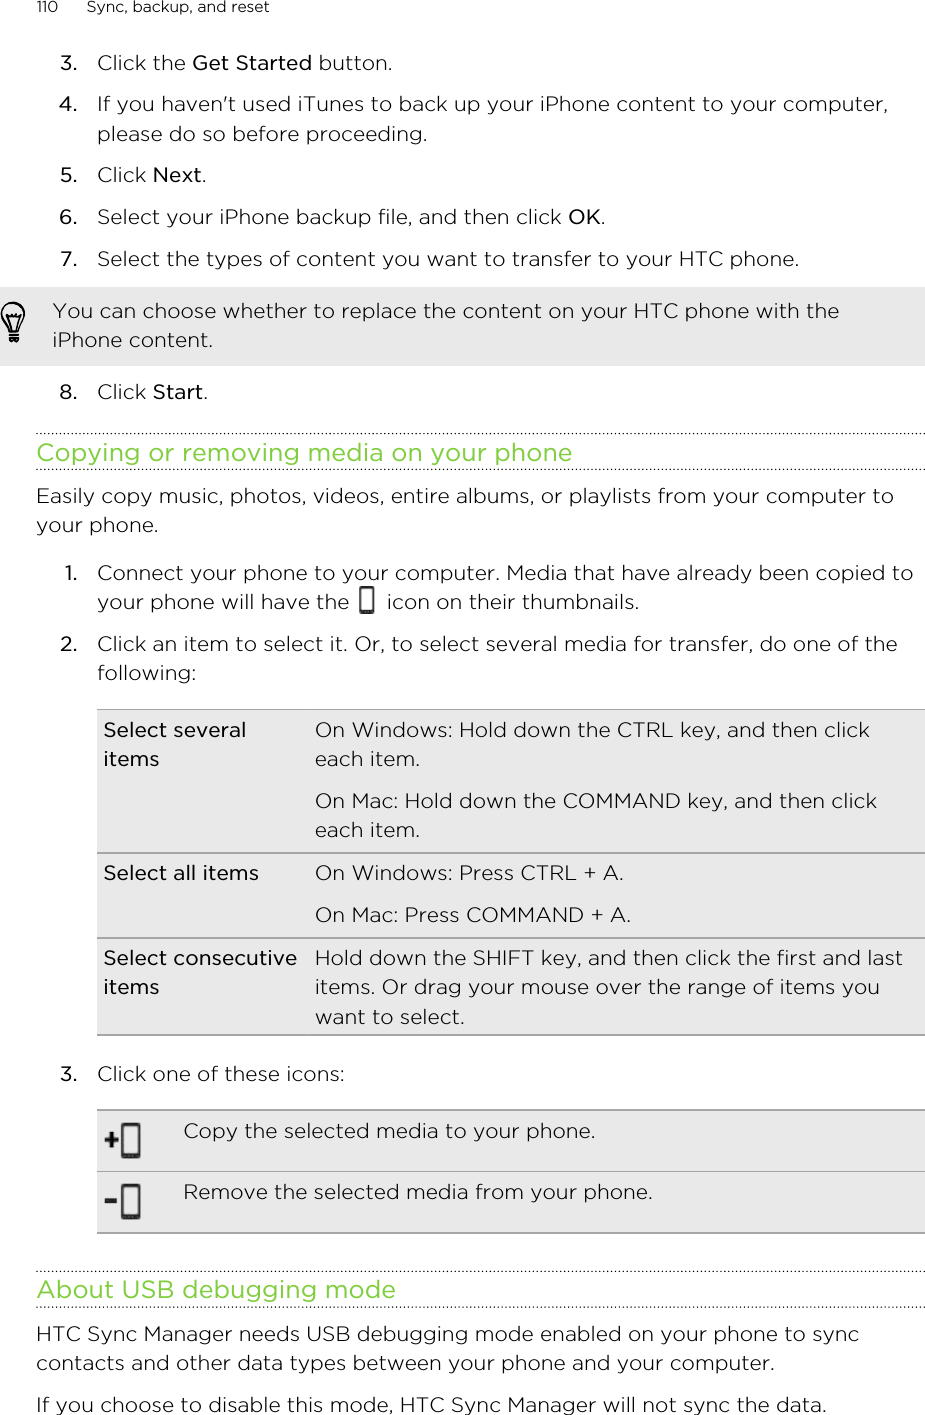 3. Click the Get Started button.4. If you haven&apos;t used iTunes to back up your iPhone content to your computer,please do so before proceeding.5. Click Next.6. Select your iPhone backup file, and then click OK.7. Select the types of content you want to transfer to your HTC phone. You can choose whether to replace the content on your HTC phone with theiPhone content.8. Click Start.Copying or removing media on your phoneEasily copy music, photos, videos, entire albums, or playlists from your computer toyour phone.1. Connect your phone to your computer. Media that have already been copied toyour phone will have the   icon on their thumbnails.2. Click an item to select it. Or, to select several media for transfer, do one of thefollowing:Select severalitemsOn Windows: Hold down the CTRL key, and then clickeach item.On Mac: Hold down the COMMAND key, and then clickeach item.Select all items On Windows: Press CTRL + A.On Mac: Press COMMAND + A.Select consecutiveitemsHold down the SHIFT key, and then click the first and lastitems. Or drag your mouse over the range of items youwant to select.3. Click one of these icons:Copy the selected media to your phone.Remove the selected media from your phone.About USB debugging modeHTC Sync Manager needs USB debugging mode enabled on your phone to synccontacts and other data types between your phone and your computer.If you choose to disable this mode, HTC Sync Manager will not sync the data.110 Sync, backup, and resetHTC Confidential for Certification HTC Confidential for Certification